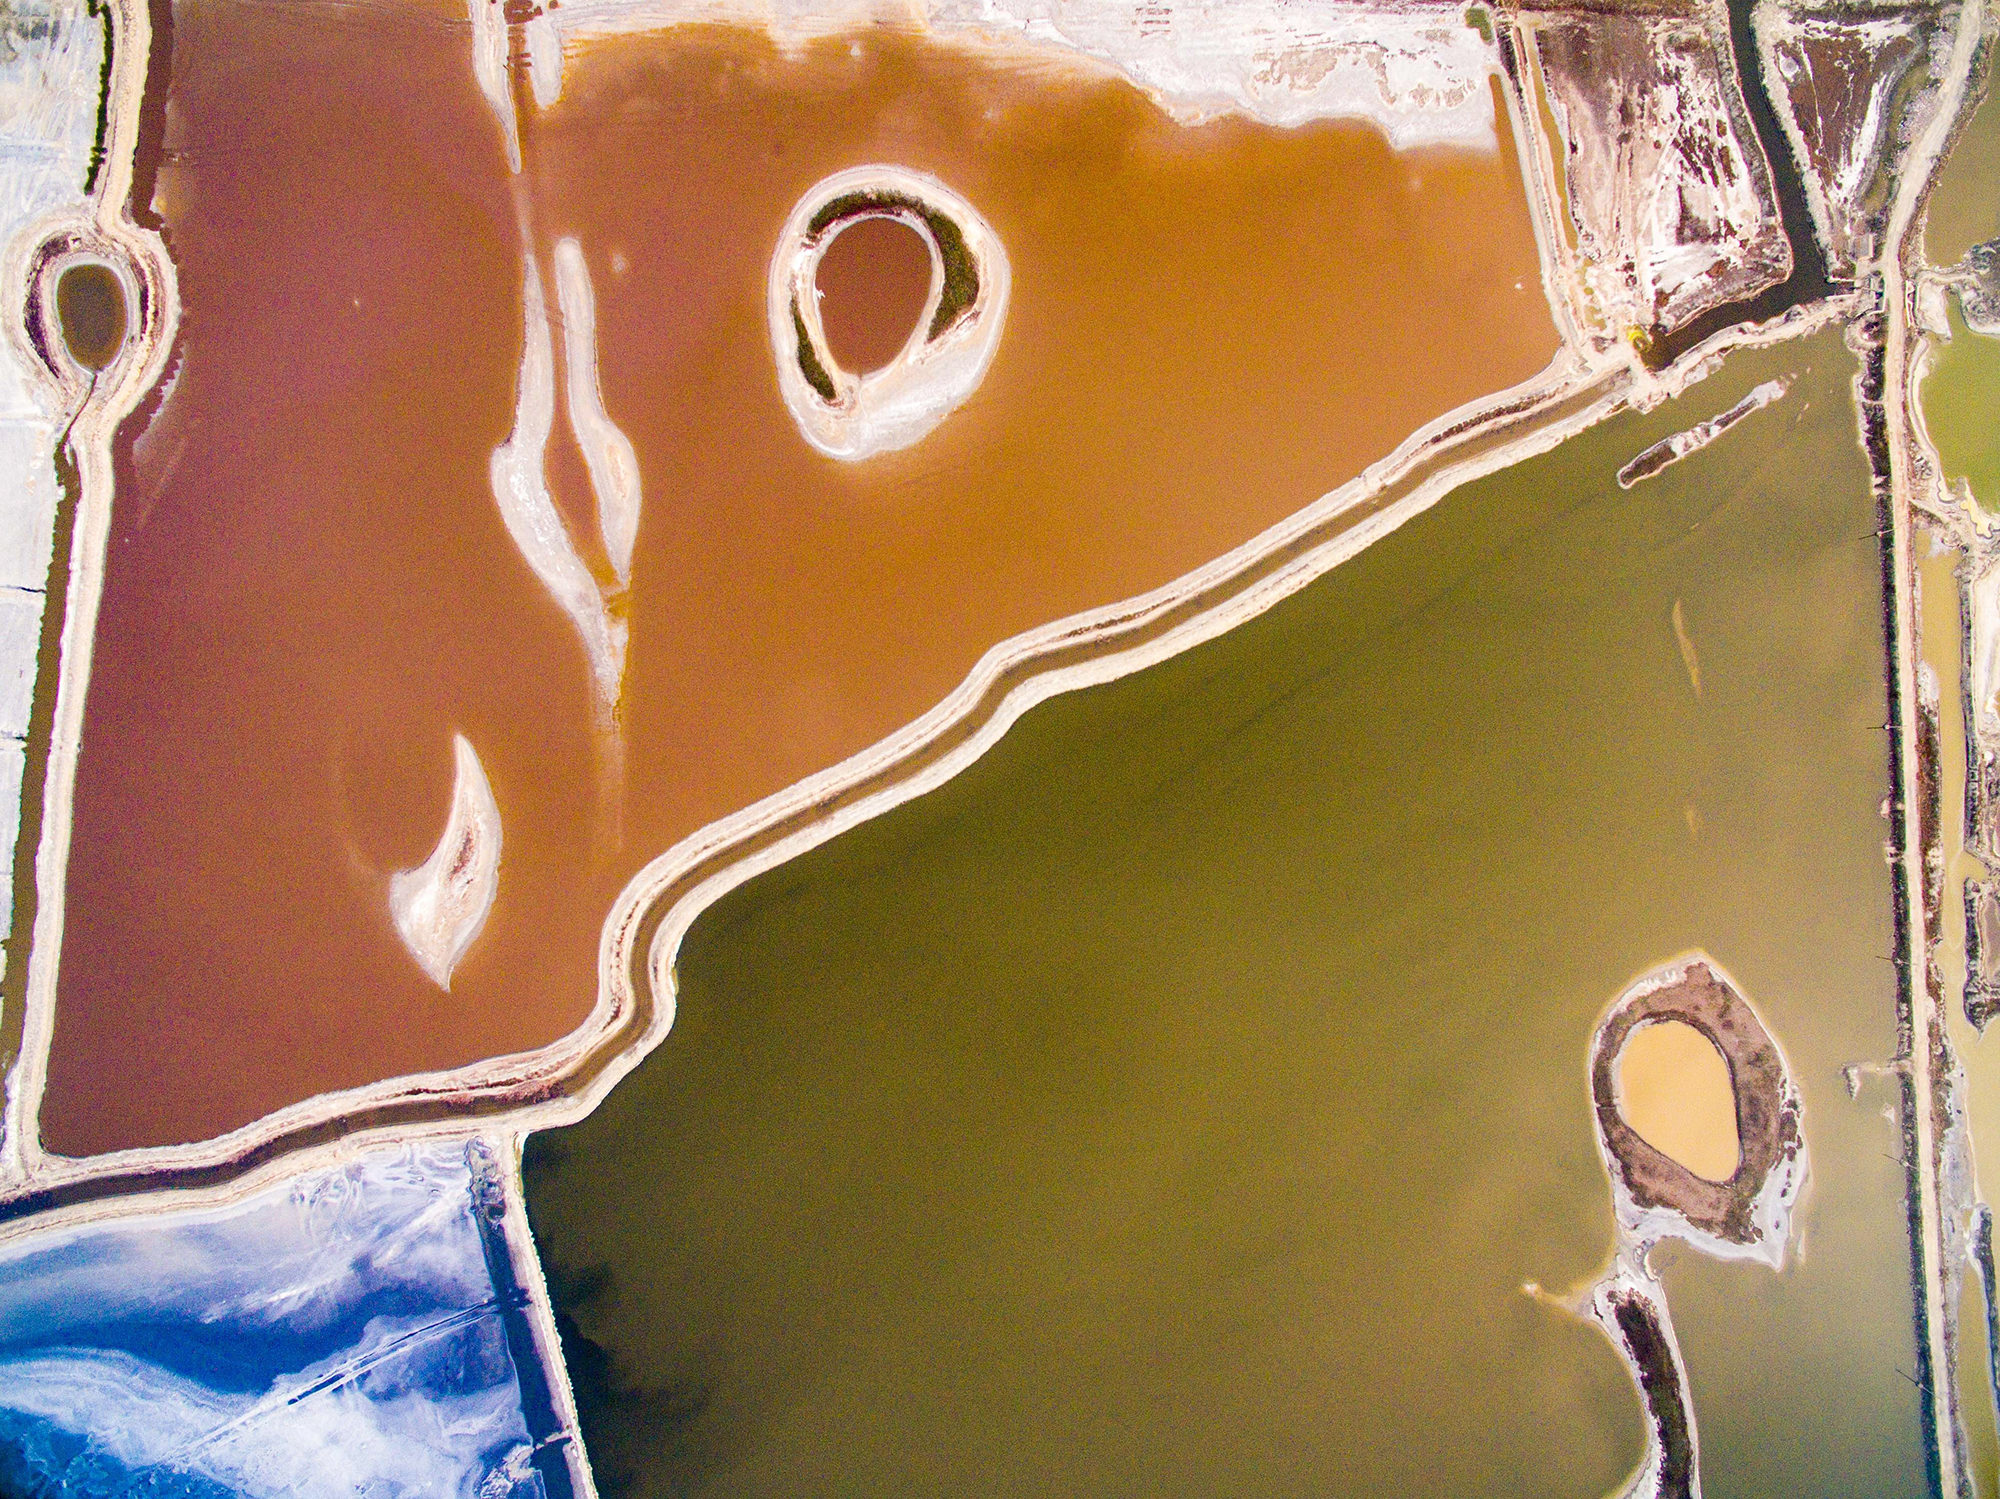 An aerial view of a world-renowned inland salt lake known as the "Dead Sea of China" in Yuncheng, Shanxi Province, on March 20, 2017.